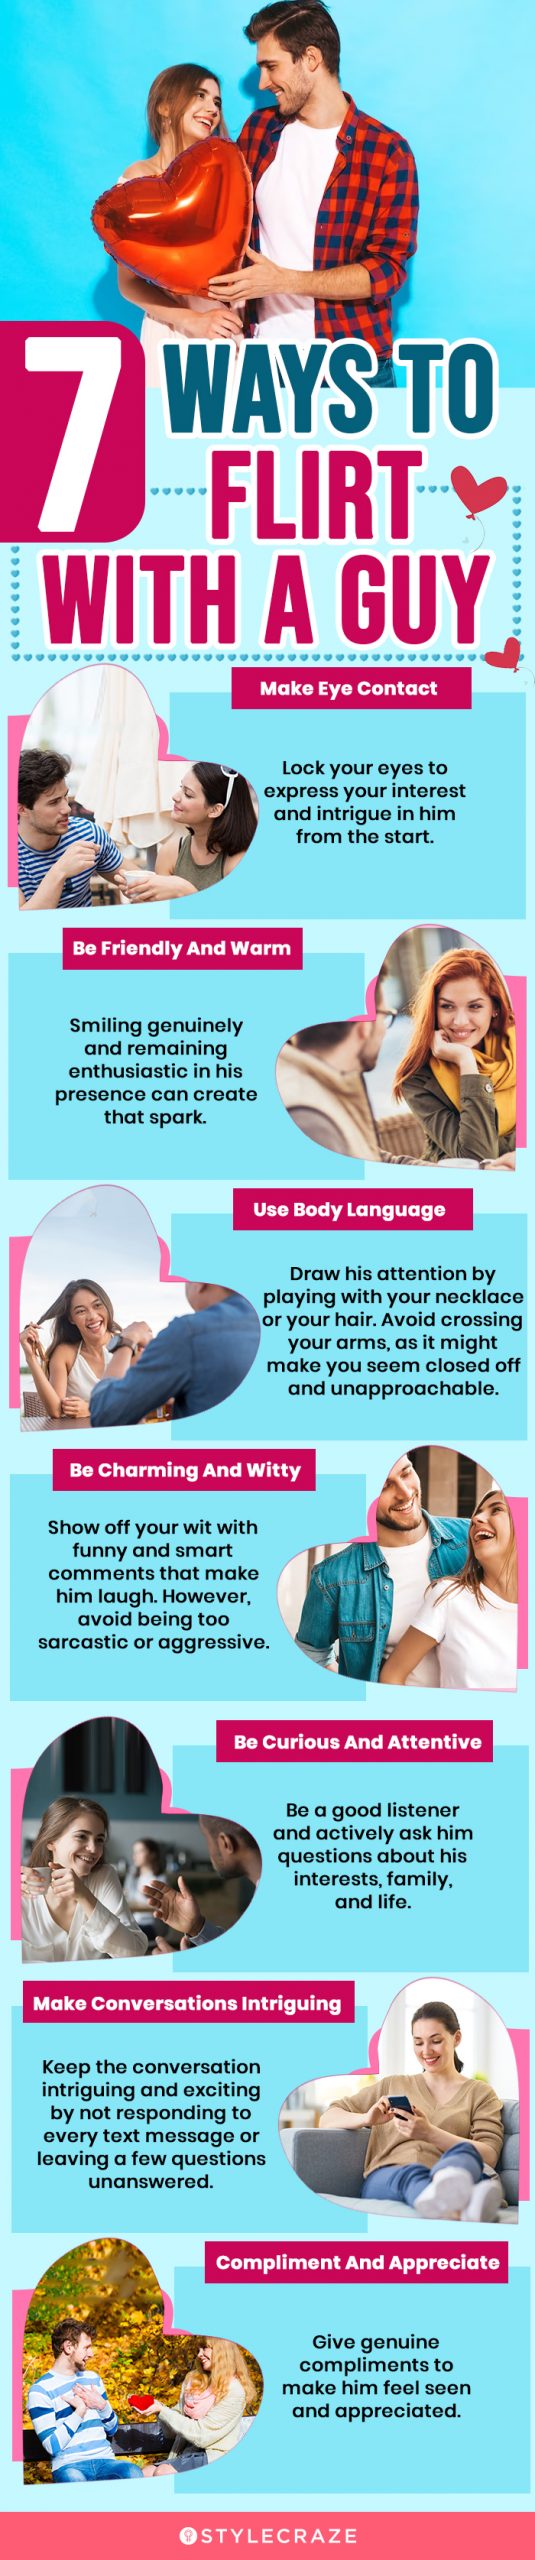 7 ways to flirt with a guy (infographic)